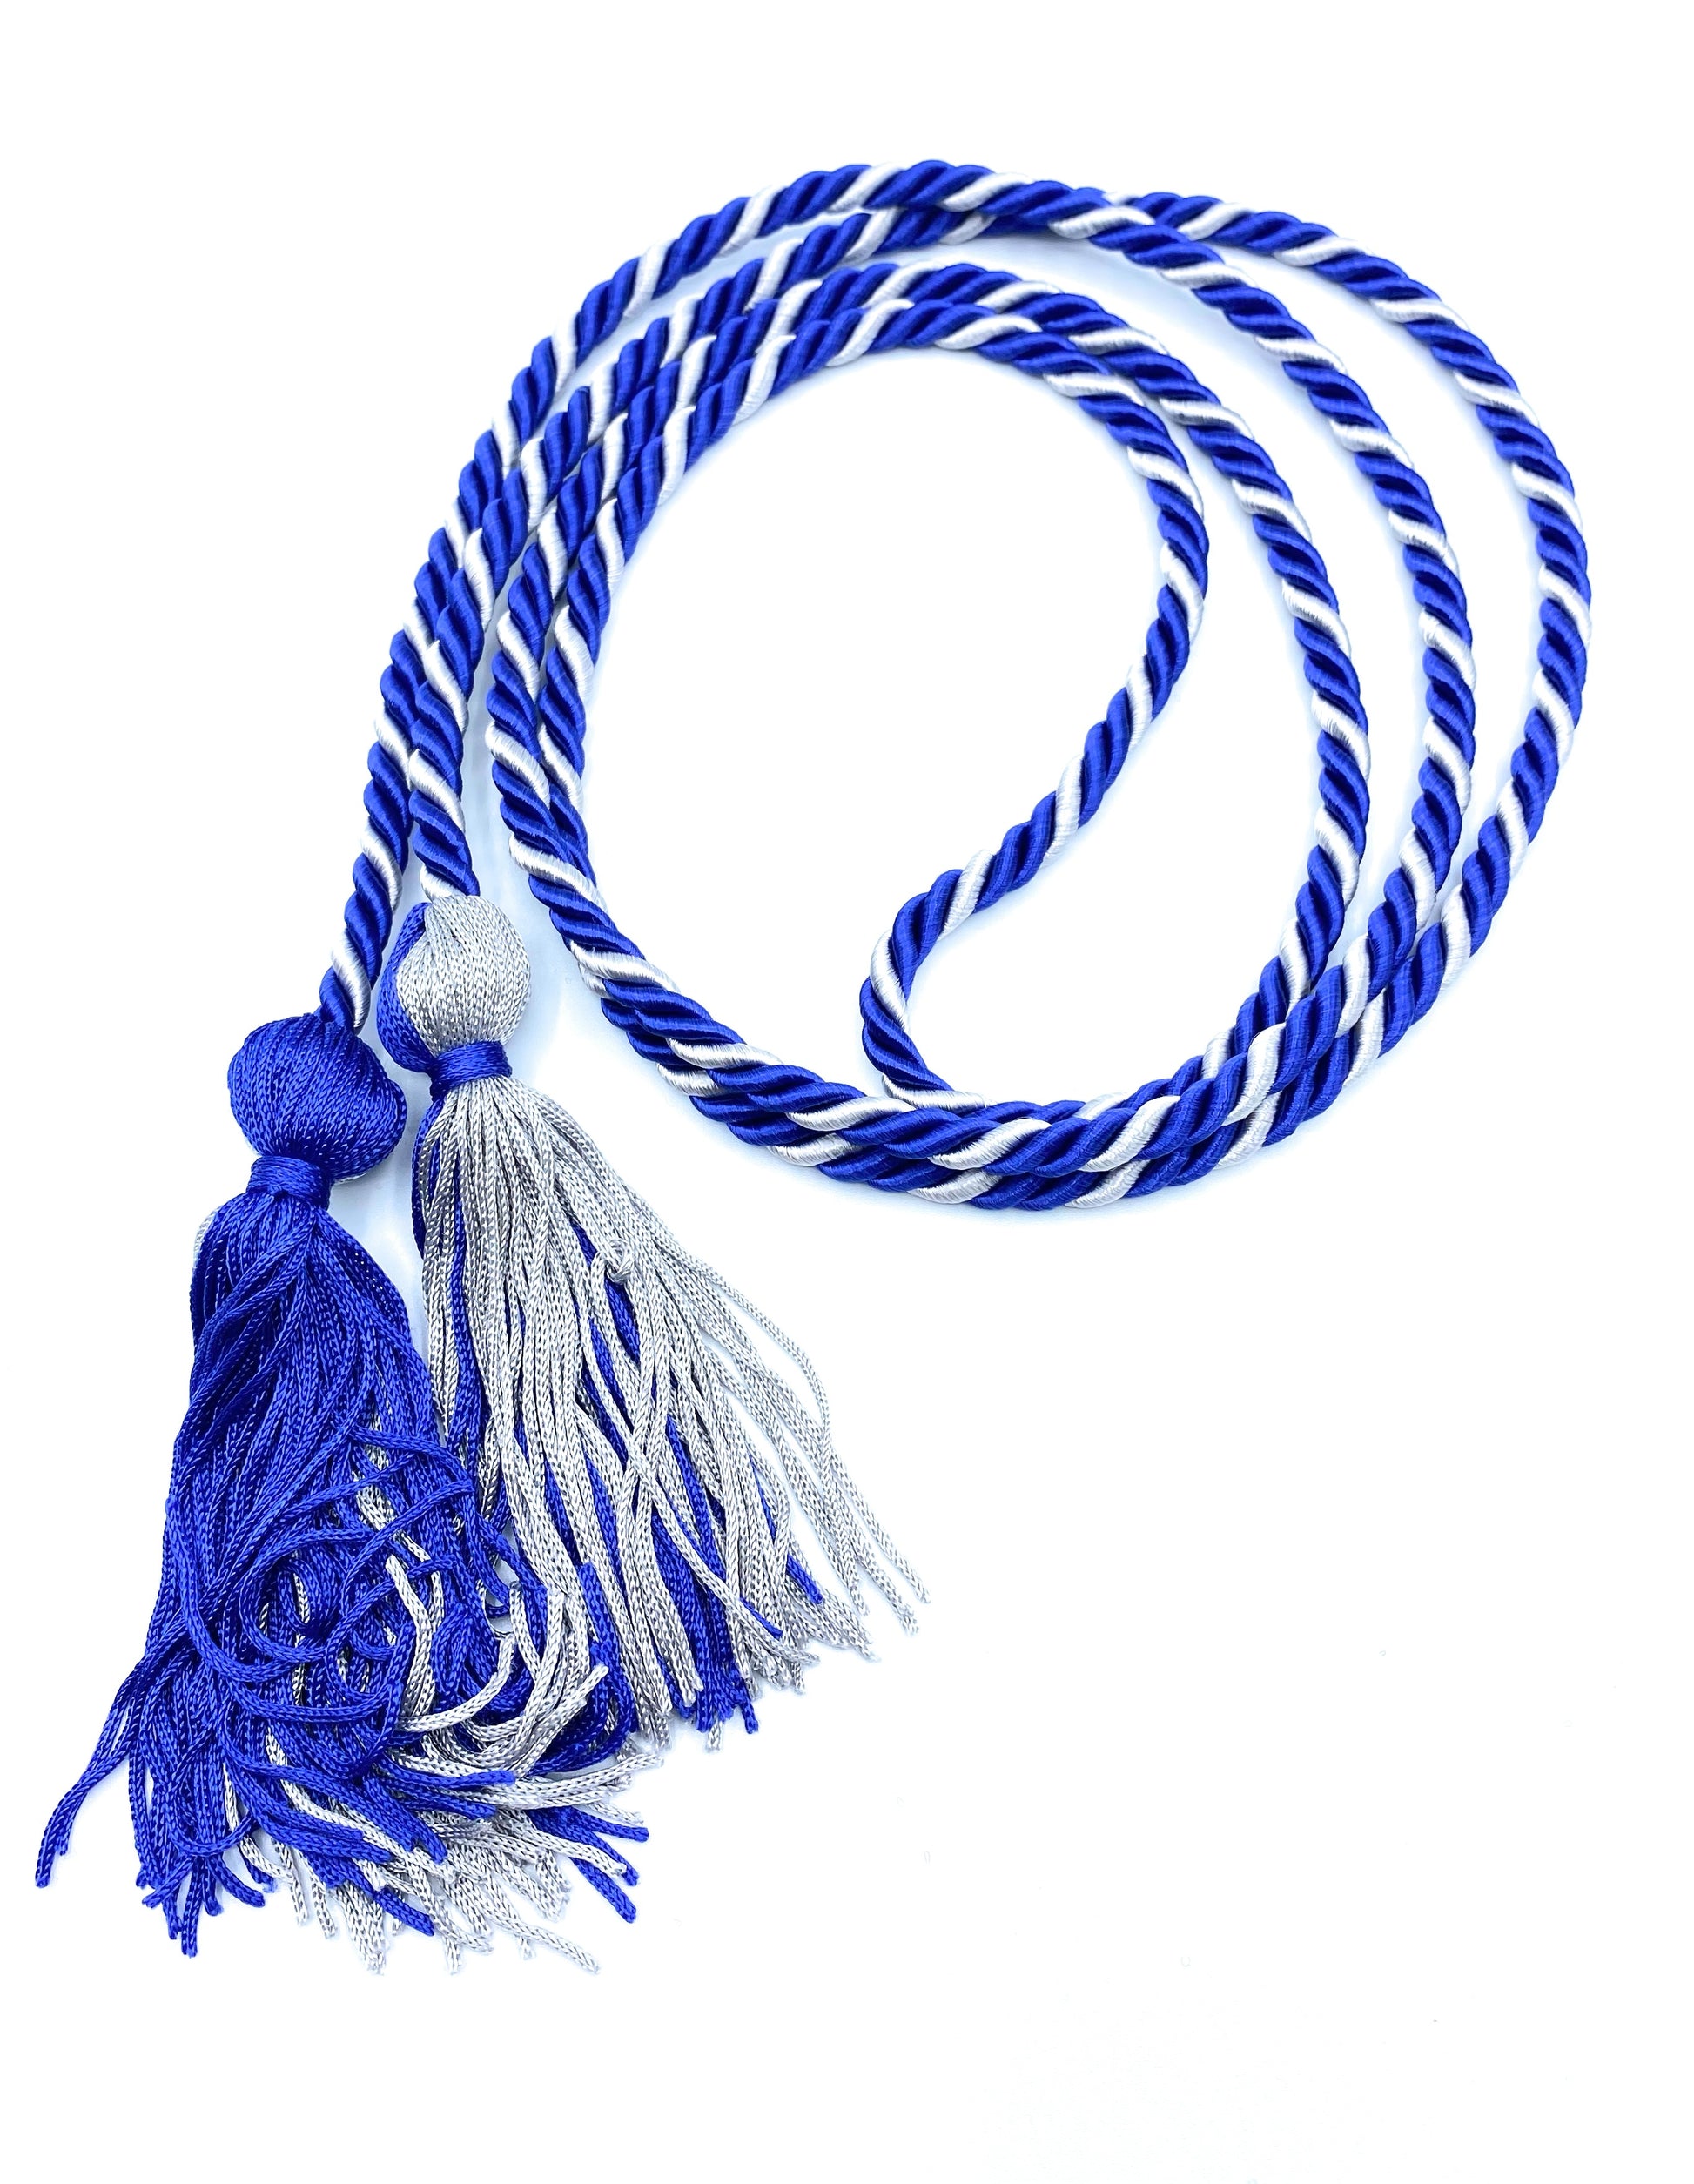 Royal/Silver Honor Cords - Honor Cord Source 